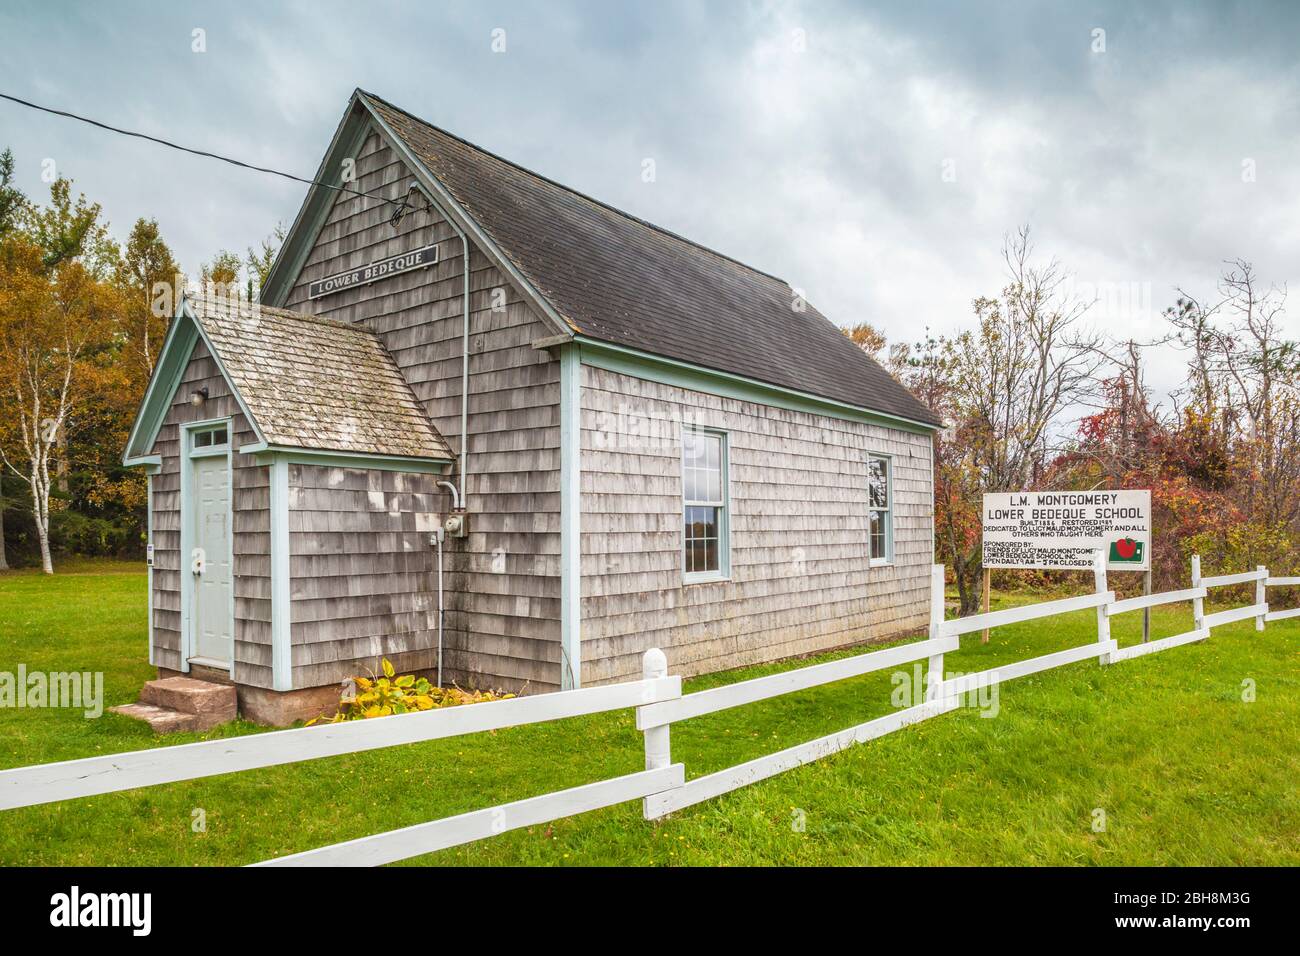 Canada, Prince Edward Island, Lower Bedeque, Lower Bedeque Schoolhouse, Lucy Maud Montgomery, author of Anne of Green Gables, was a teacher here Stock Photo